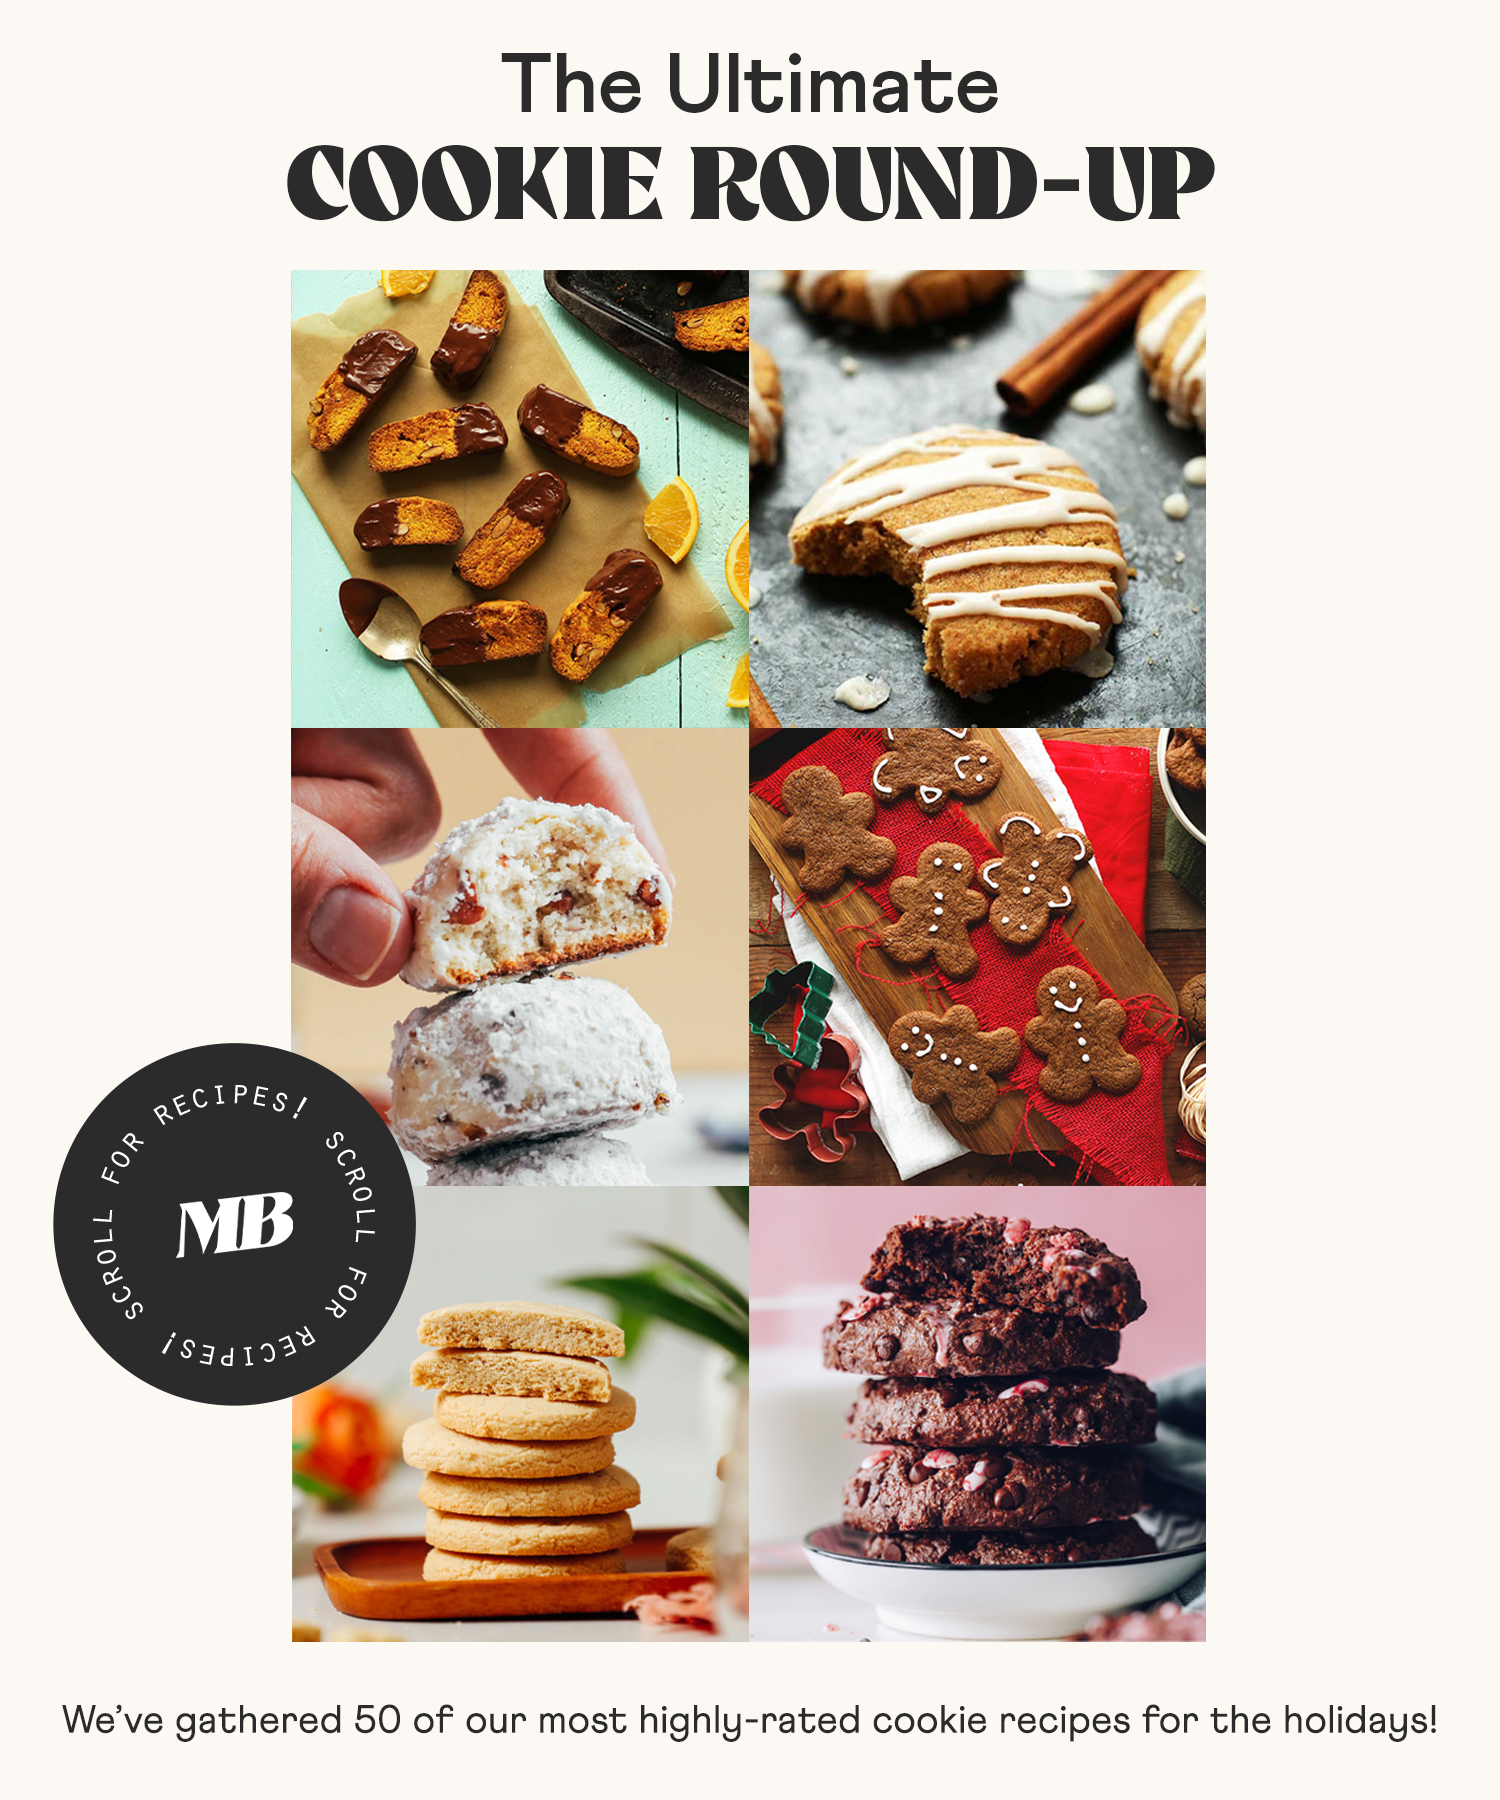 Biscotti, ginger cookies, wedding cookies, gingerbread, shortbread, and chocolate peppermint cookies for our cookie recipes round-up